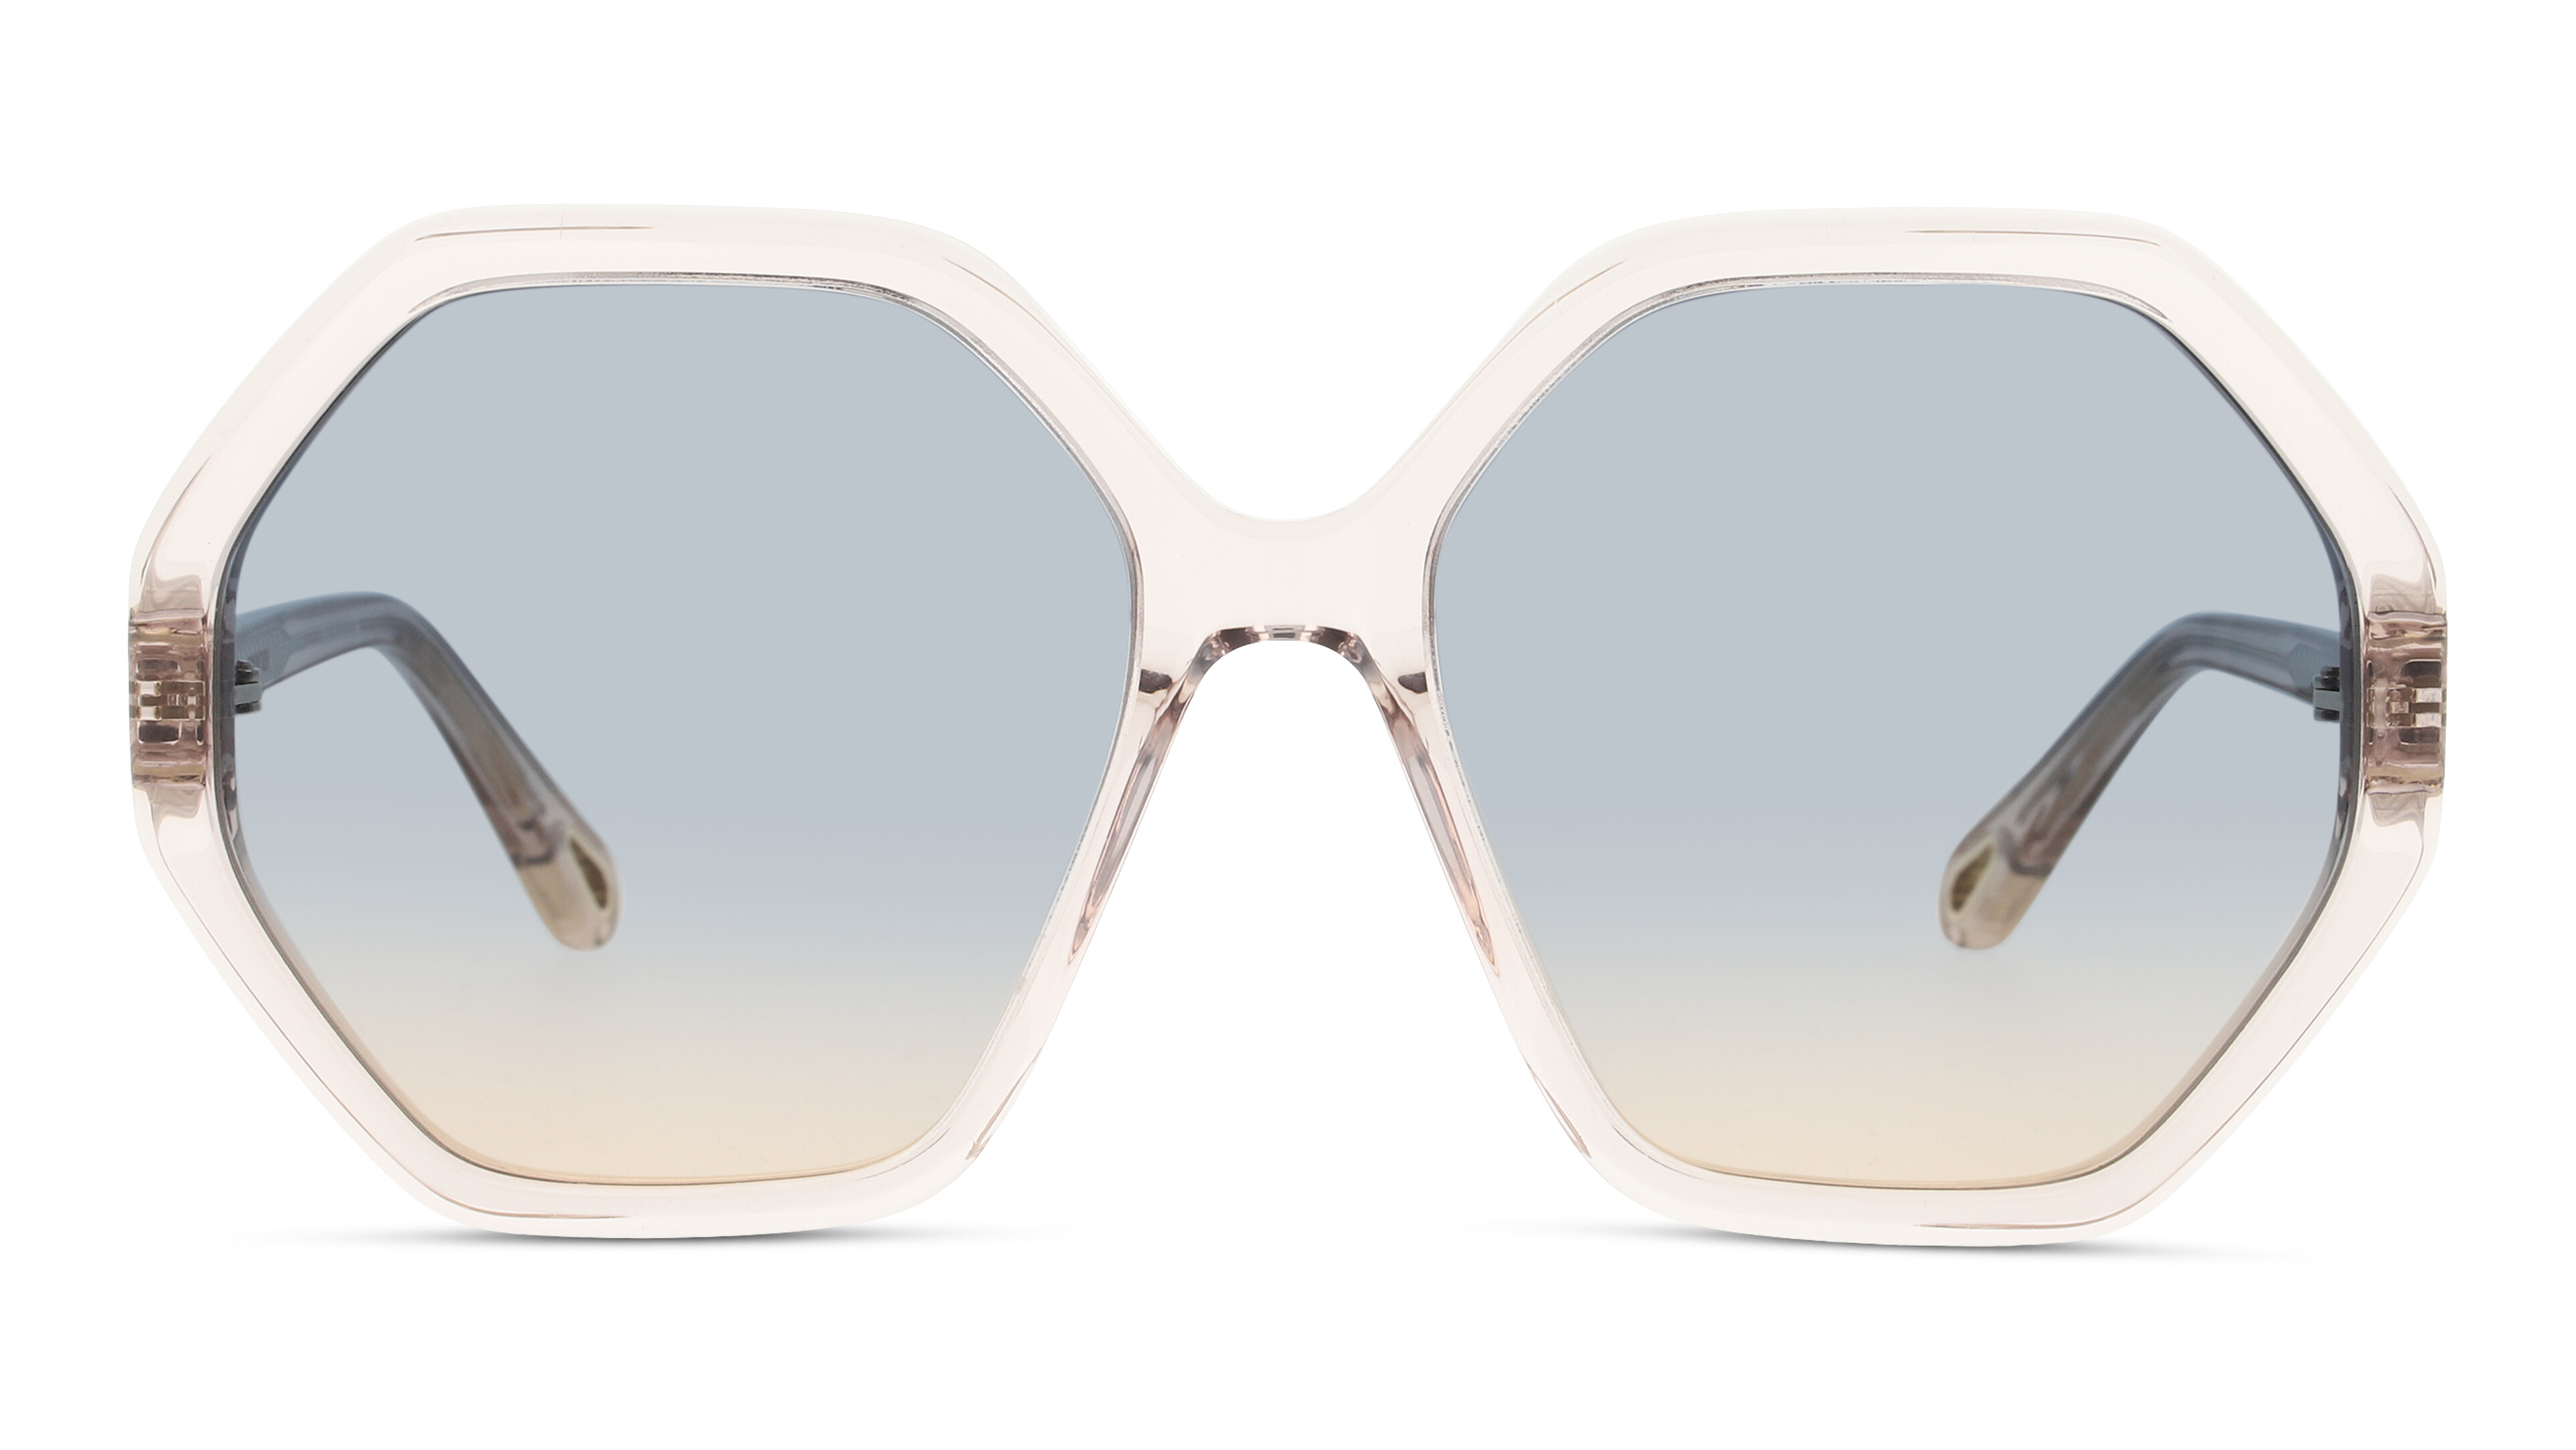 [products.image.front] Chloe CH0008S 002 Sonnenbrille